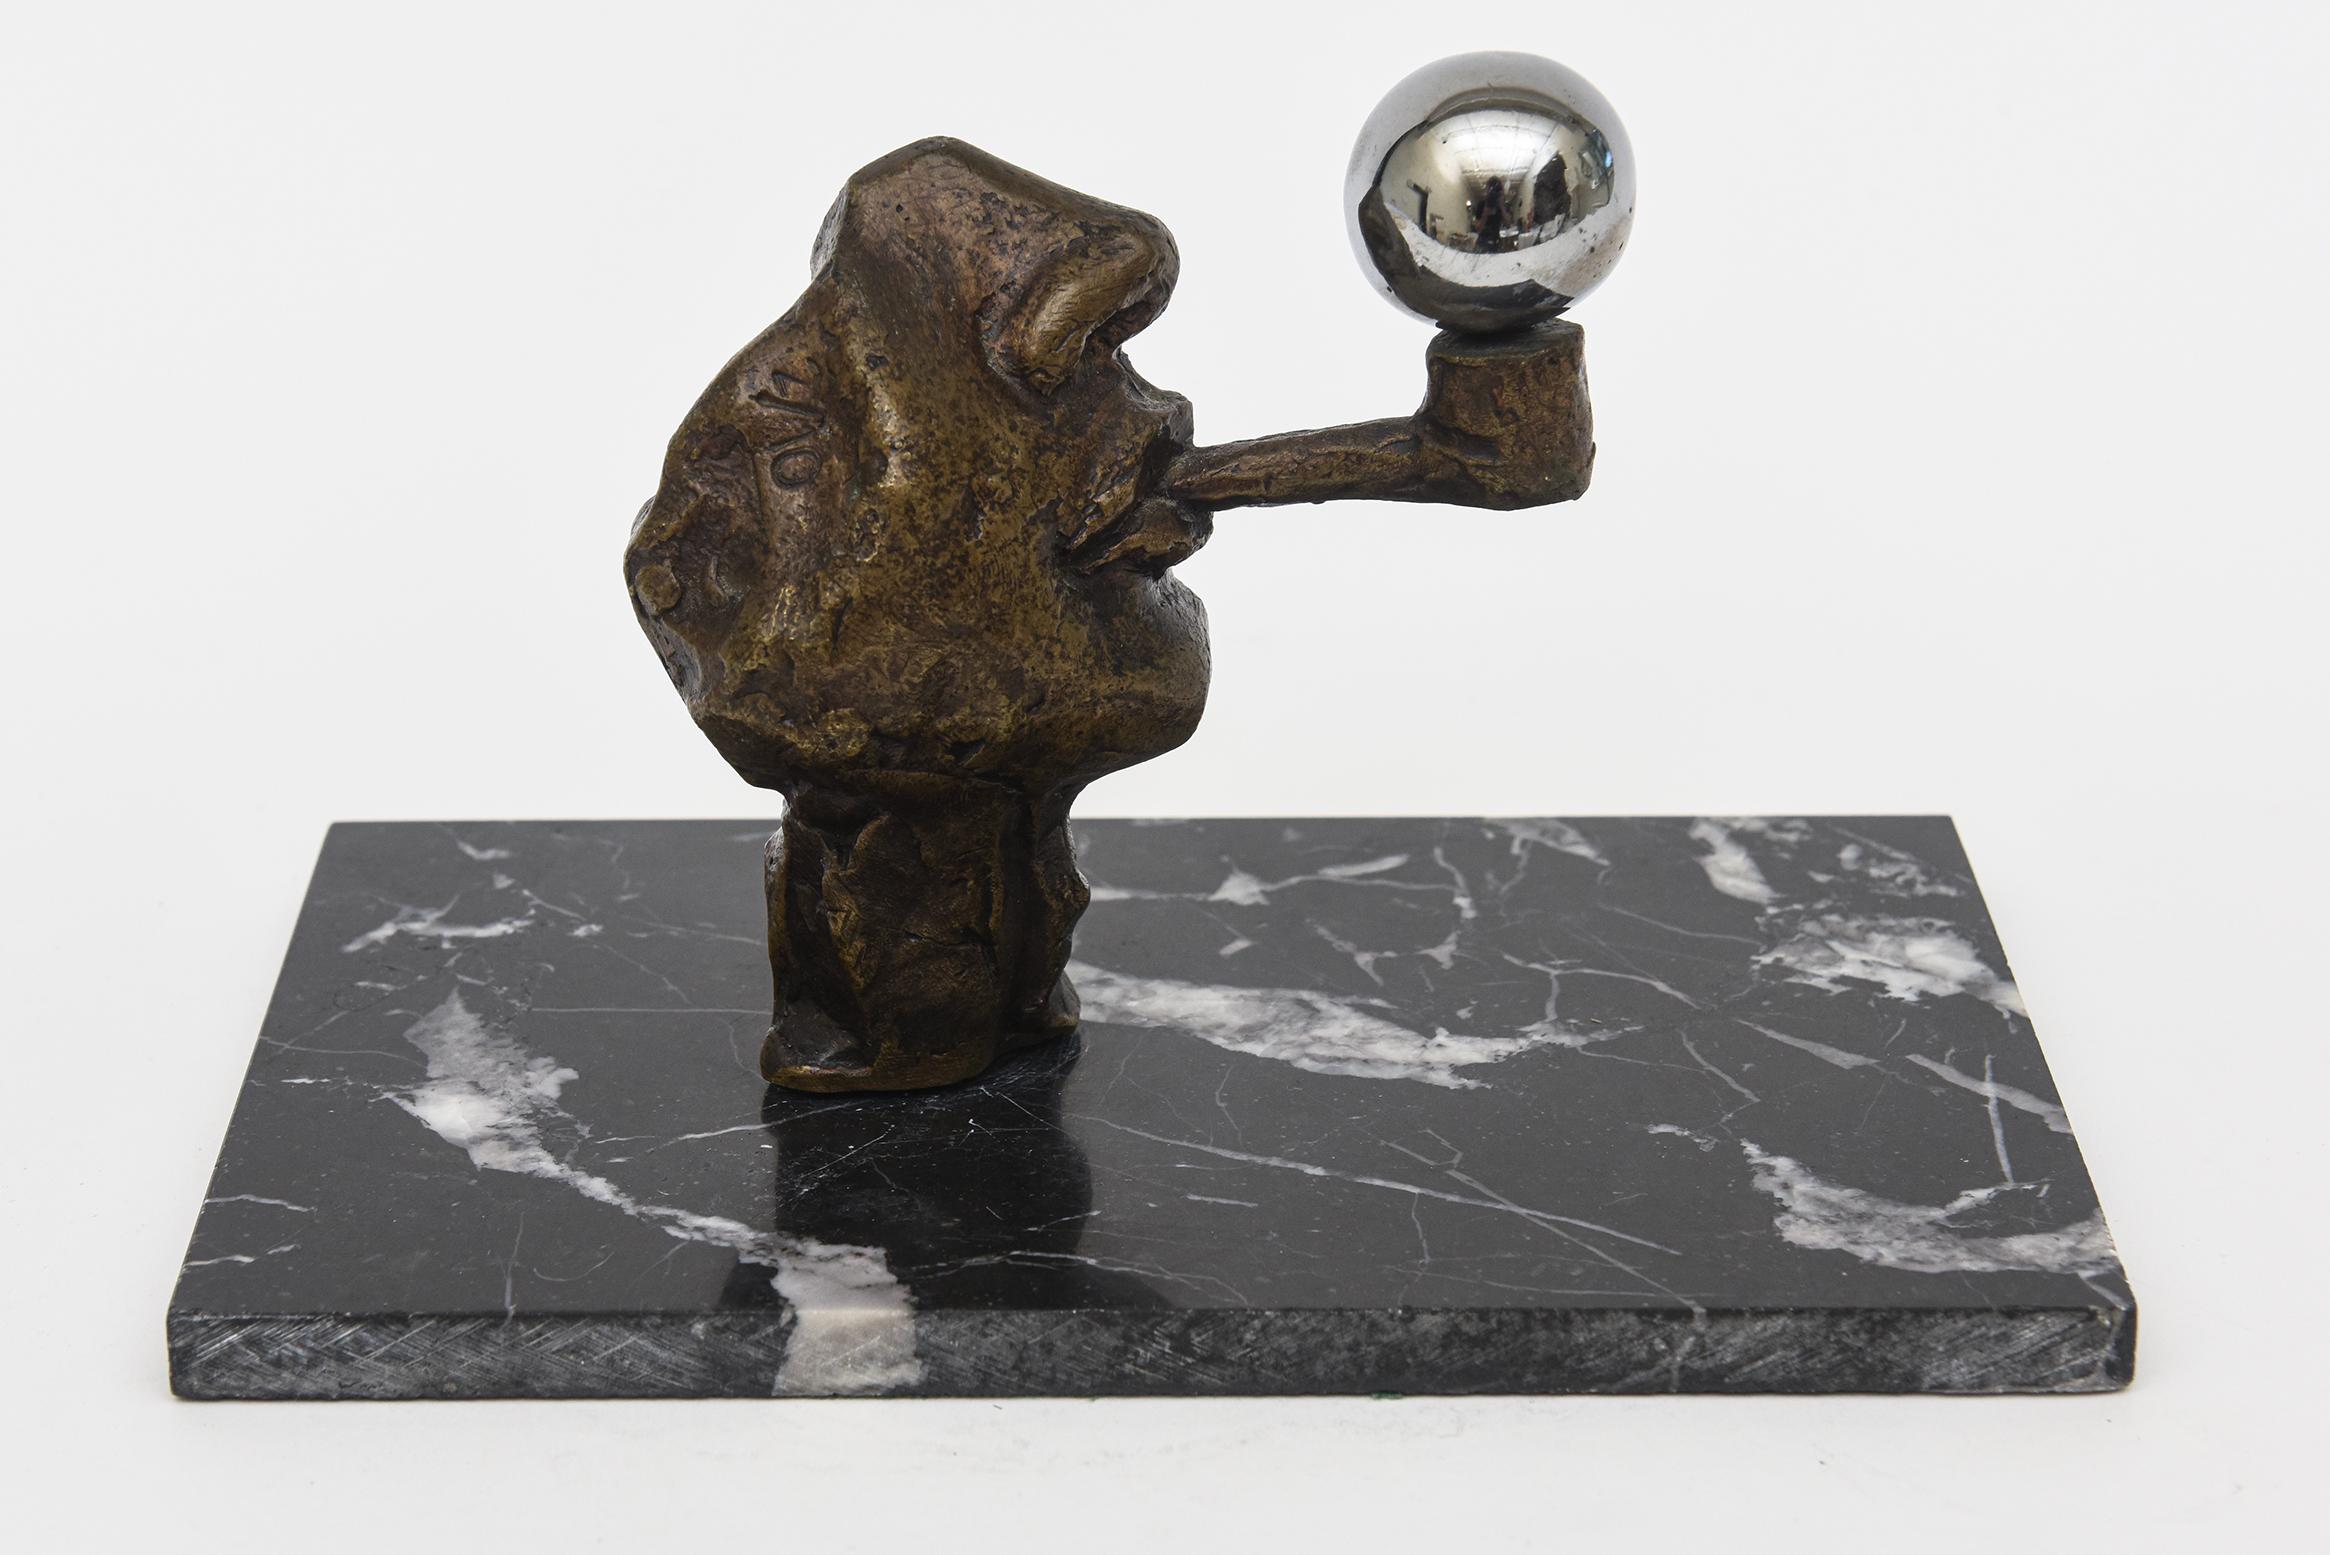  Bronze, Chrome, Marble Vintage Sculpture By Victor Salmones Blowing Bubbles (Moderne) im Angebot